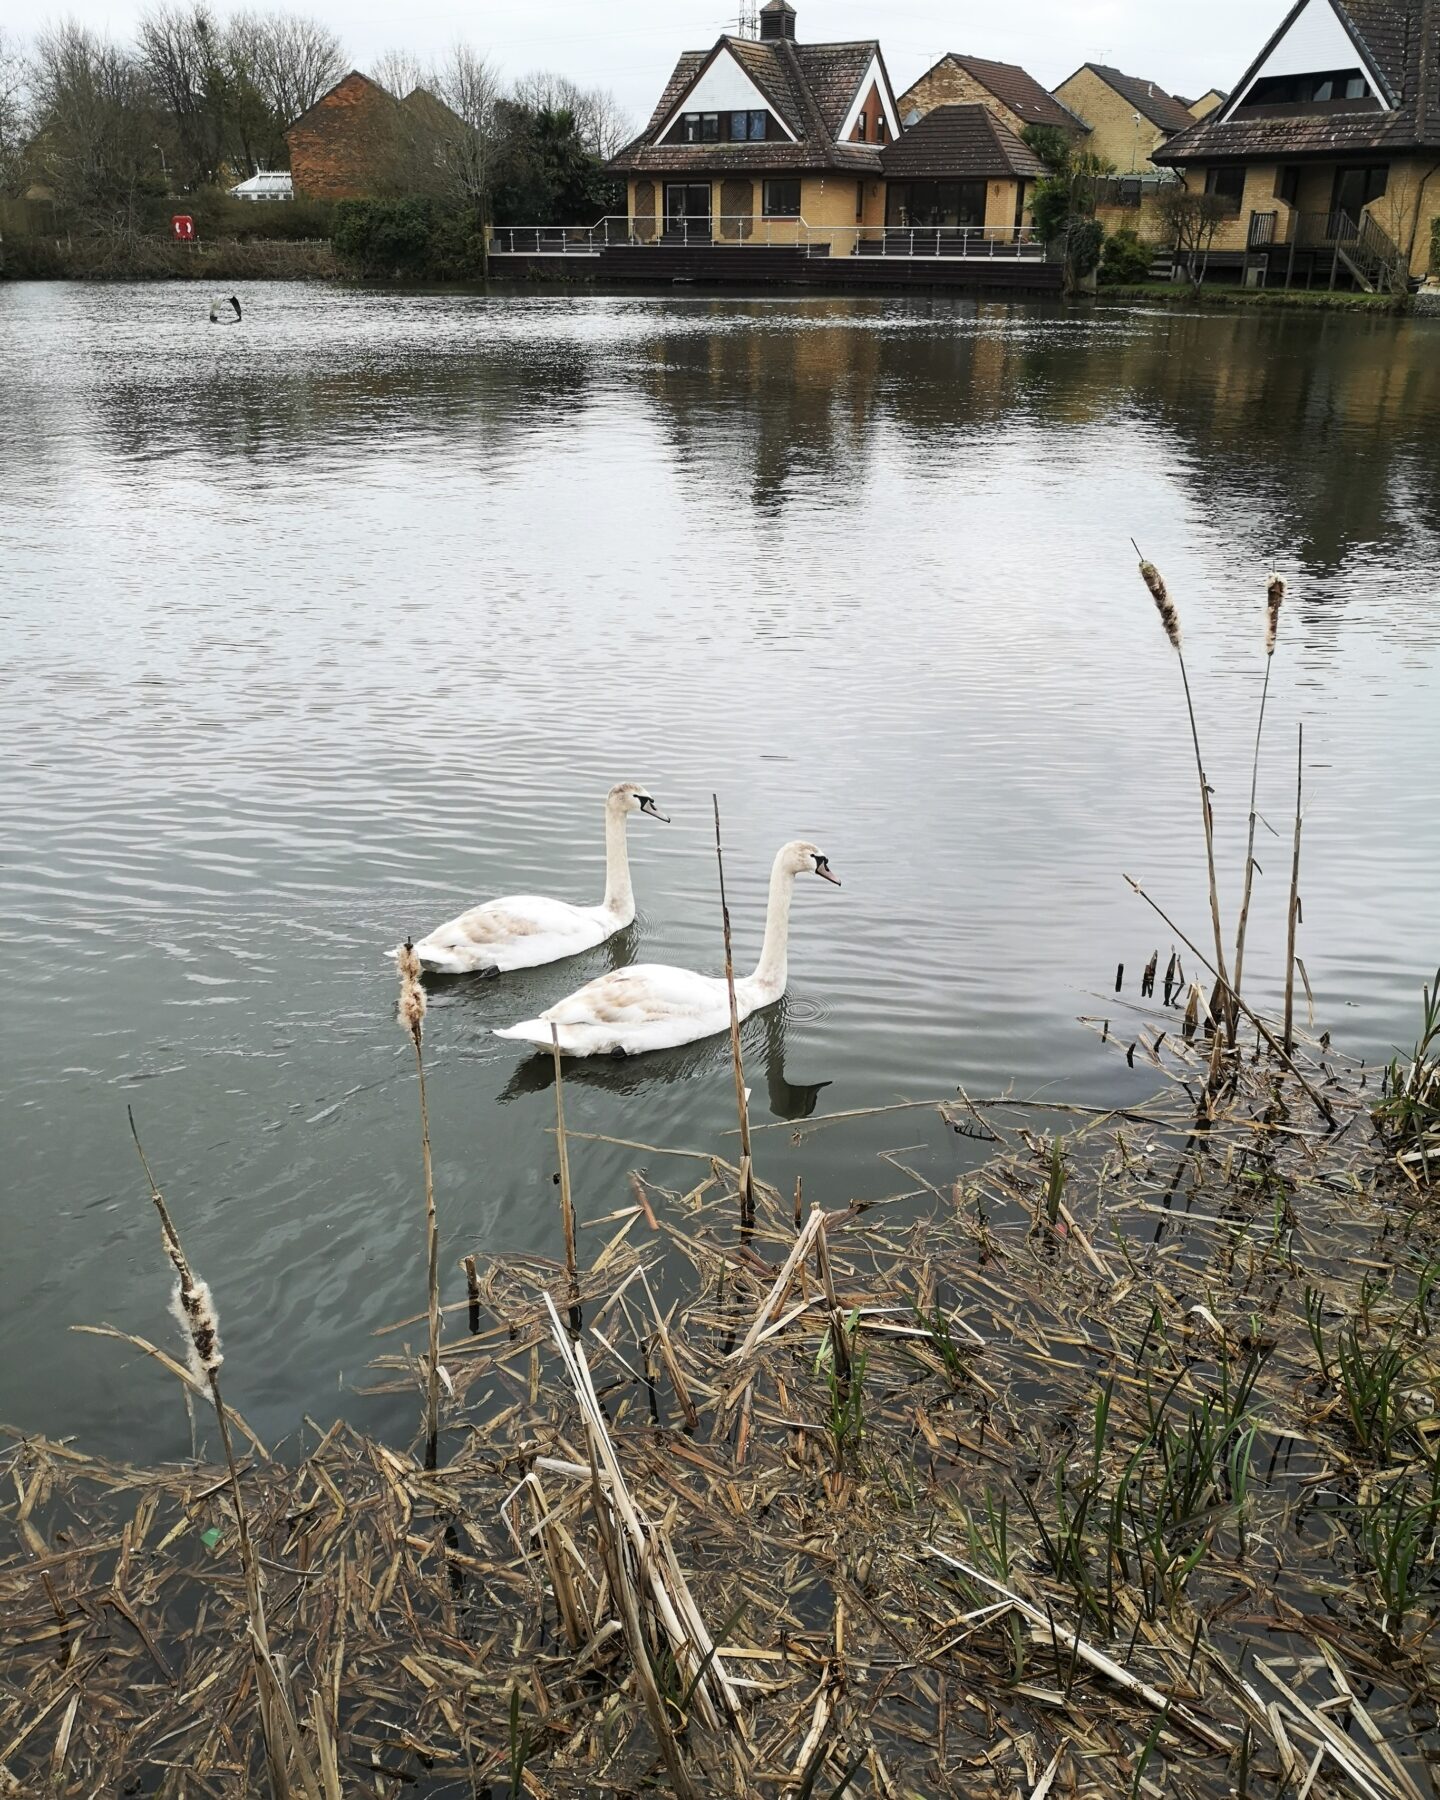 Singleton Lake, Ashford Green Corridor, Ashford Places, Villages in Kent, Free Family Days Out, Days Out in Kent, Visit Kent, Things to do in Kent, Kentish Life, Family Time, The Frenchie Mummy 